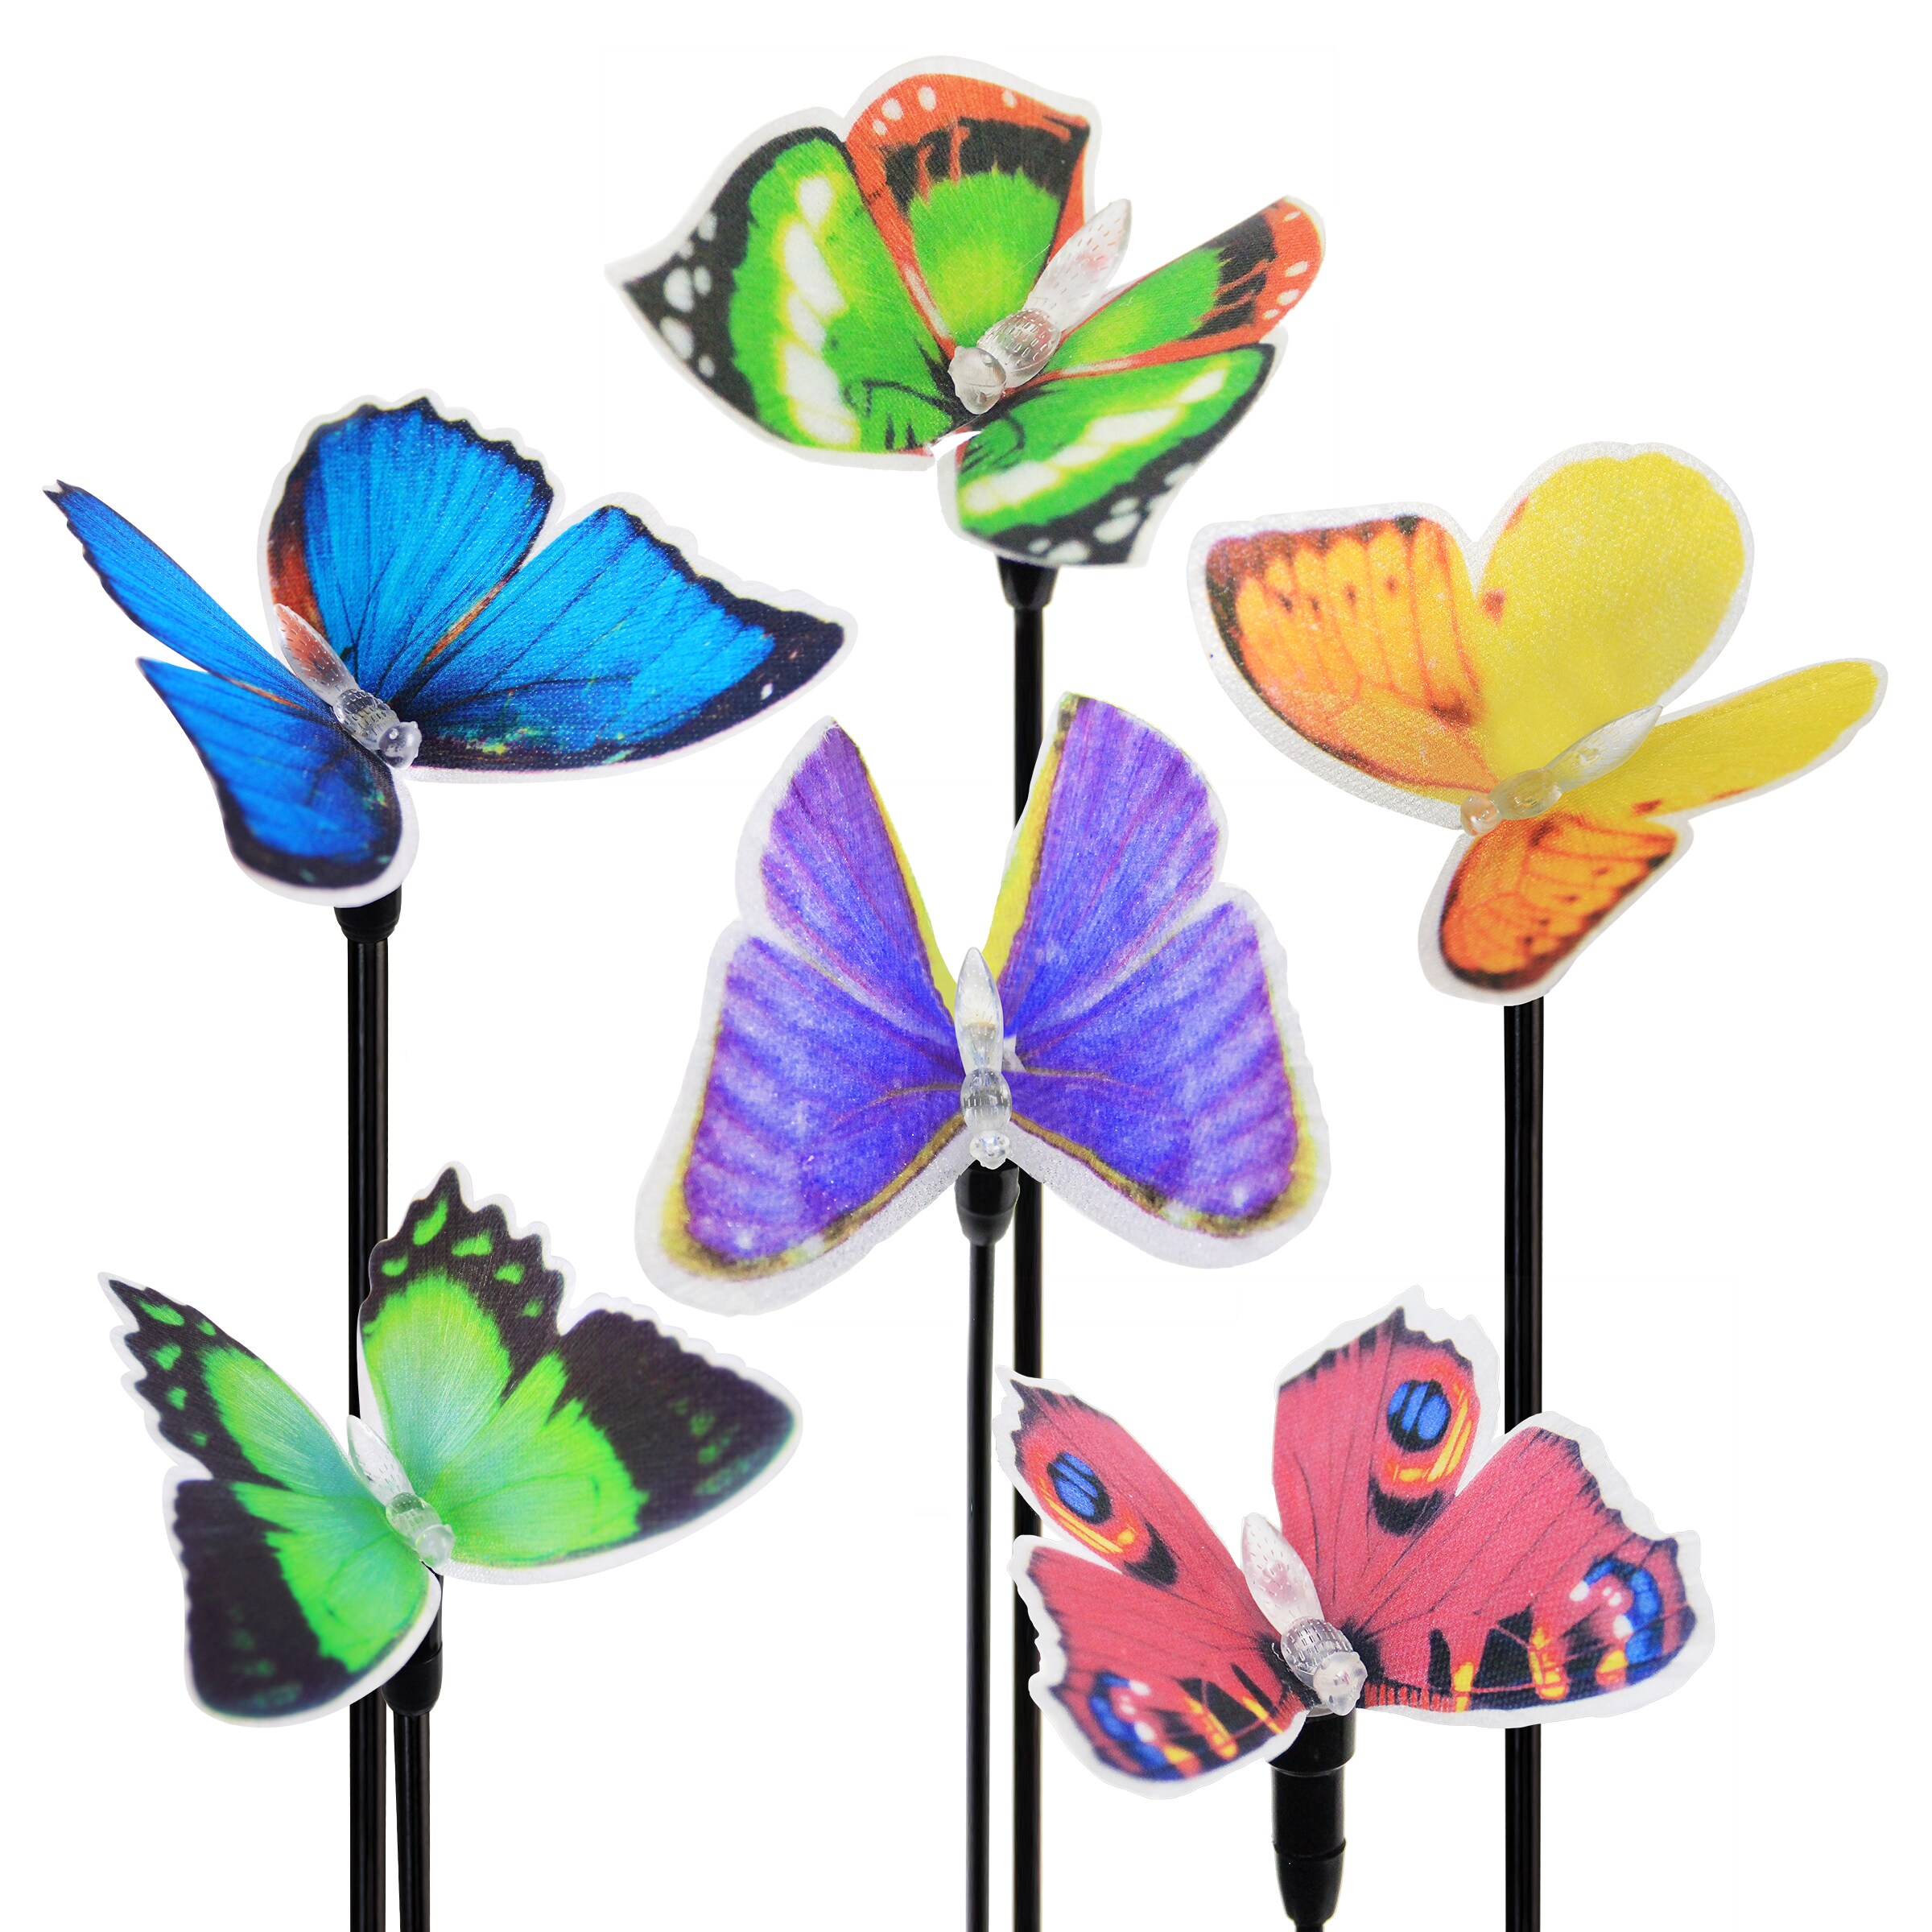 Weather Resistant Color-Changing LED Butterfly Toppers 5”W x 30”H Set of 3 Exhart 5 Inch Wide Large Butterfly Solar Garden Stakes w/Fiber Optic Light Patented LED Stakes- Butterfly Garden Decor 